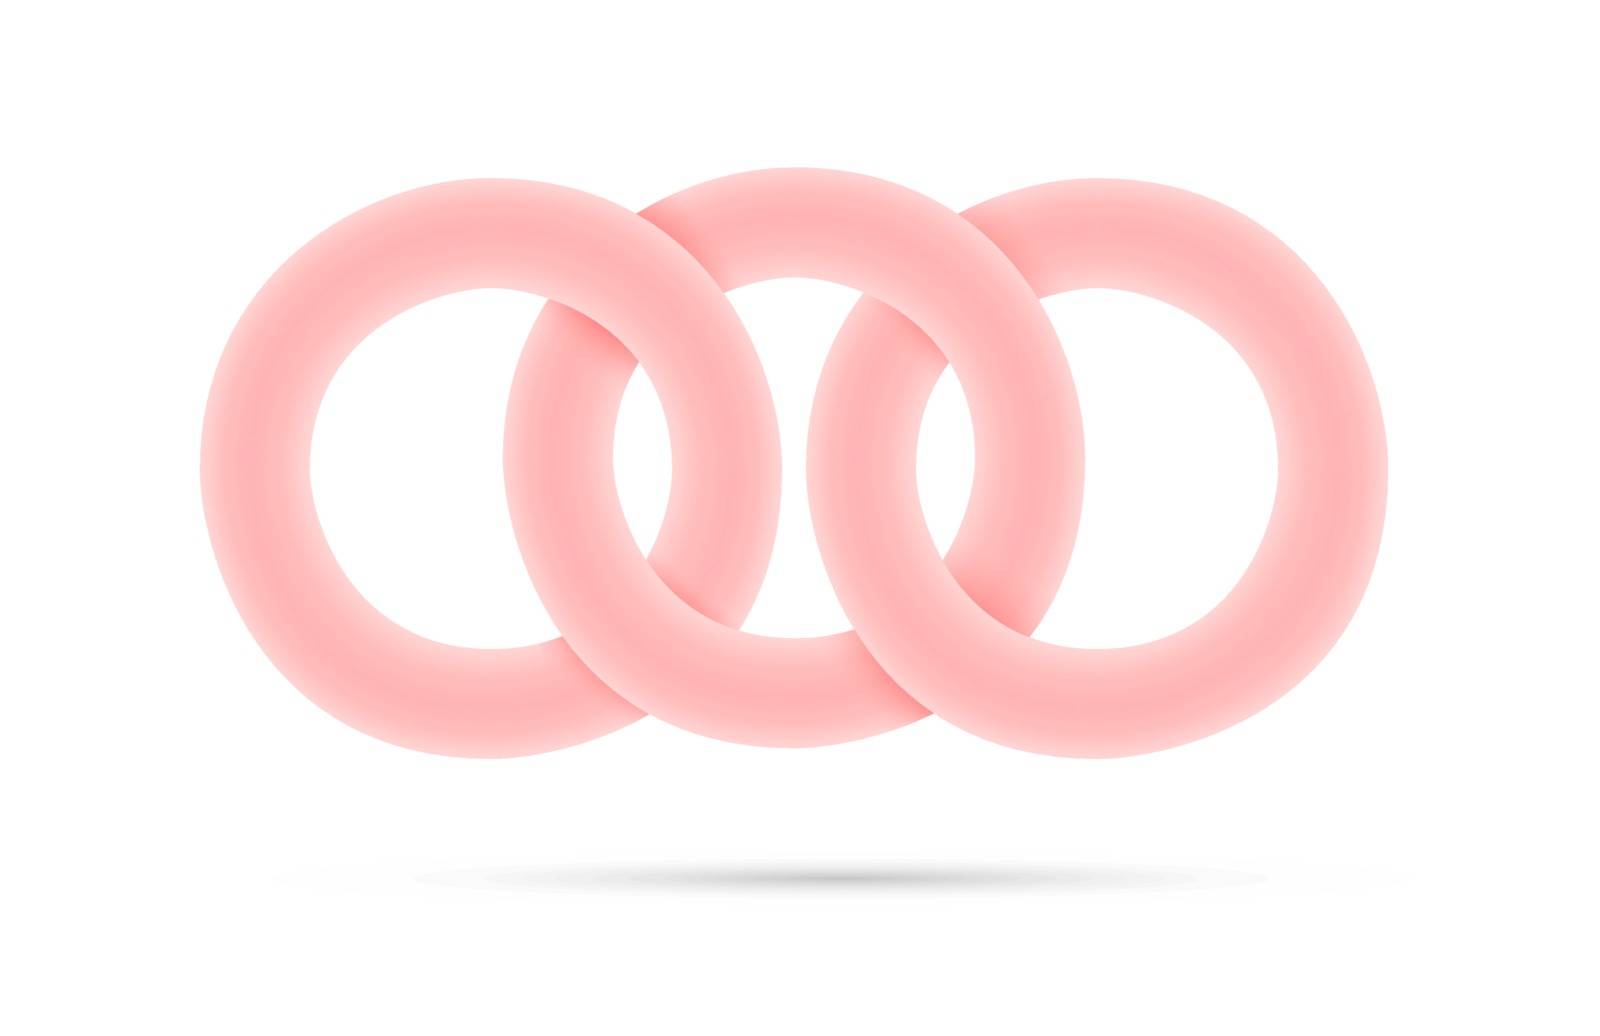 The isolated graphic element made out of three pink circles